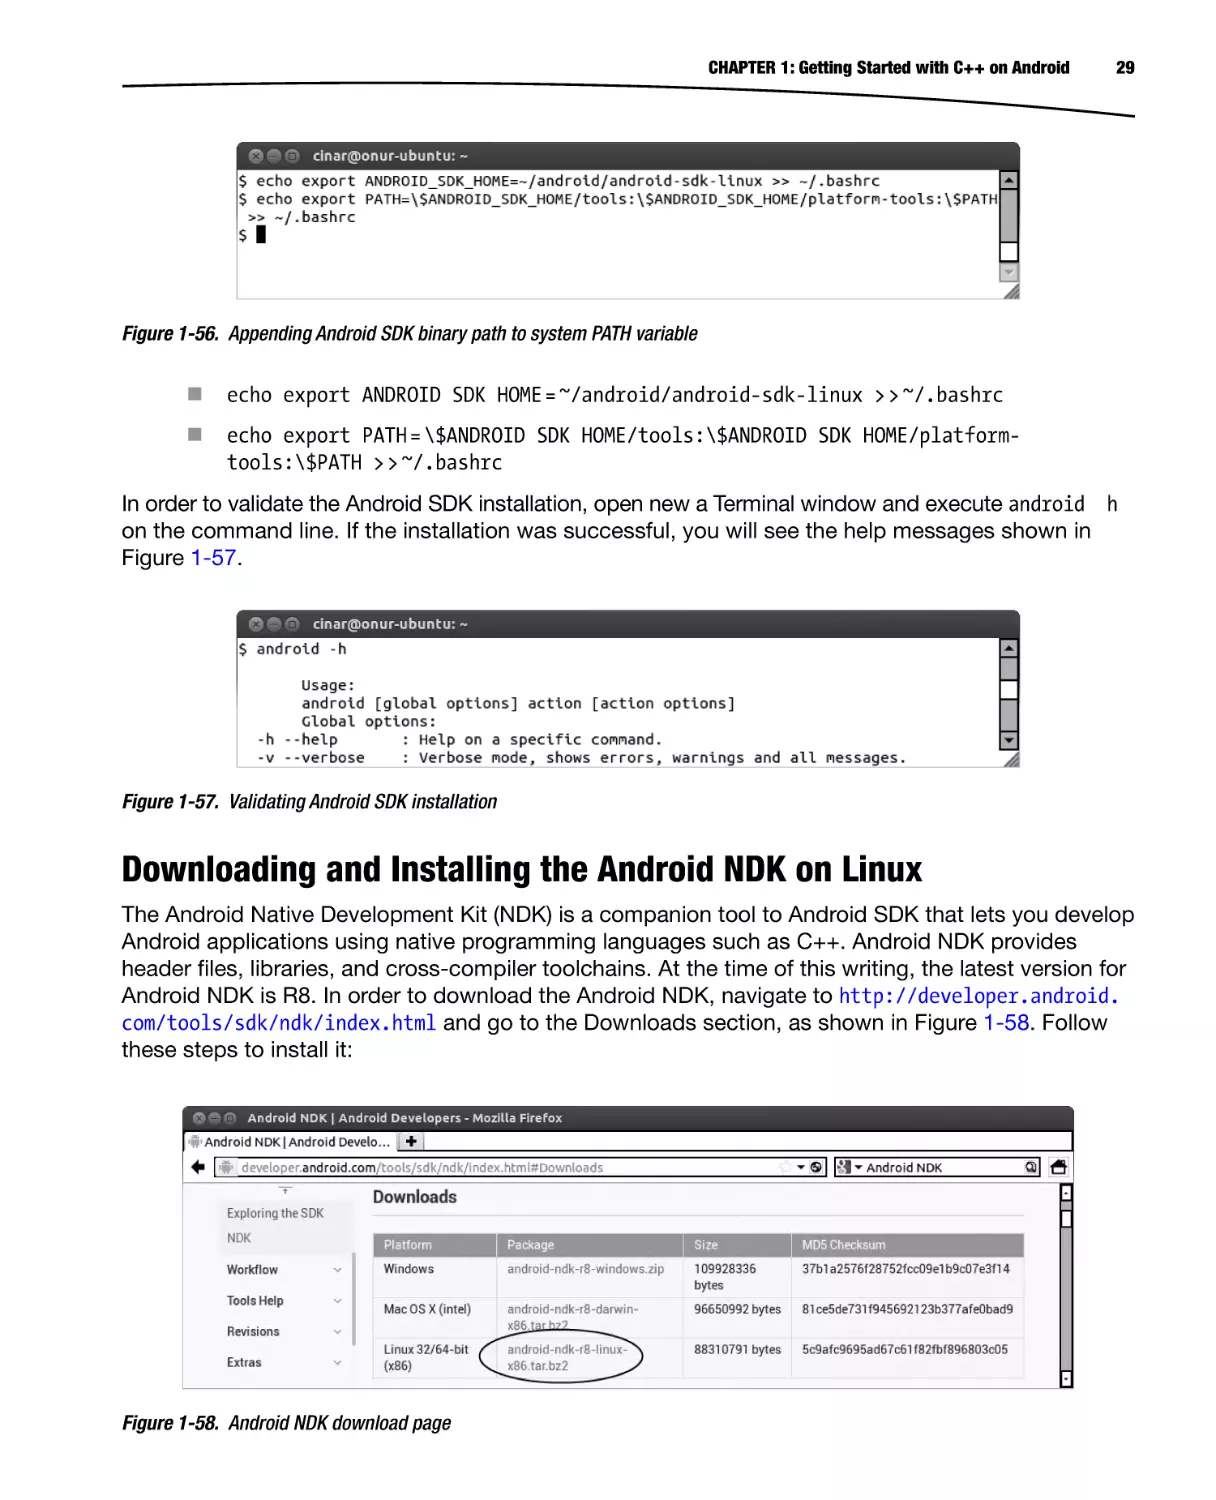 Downloading and Installing the Android NDK on Linux